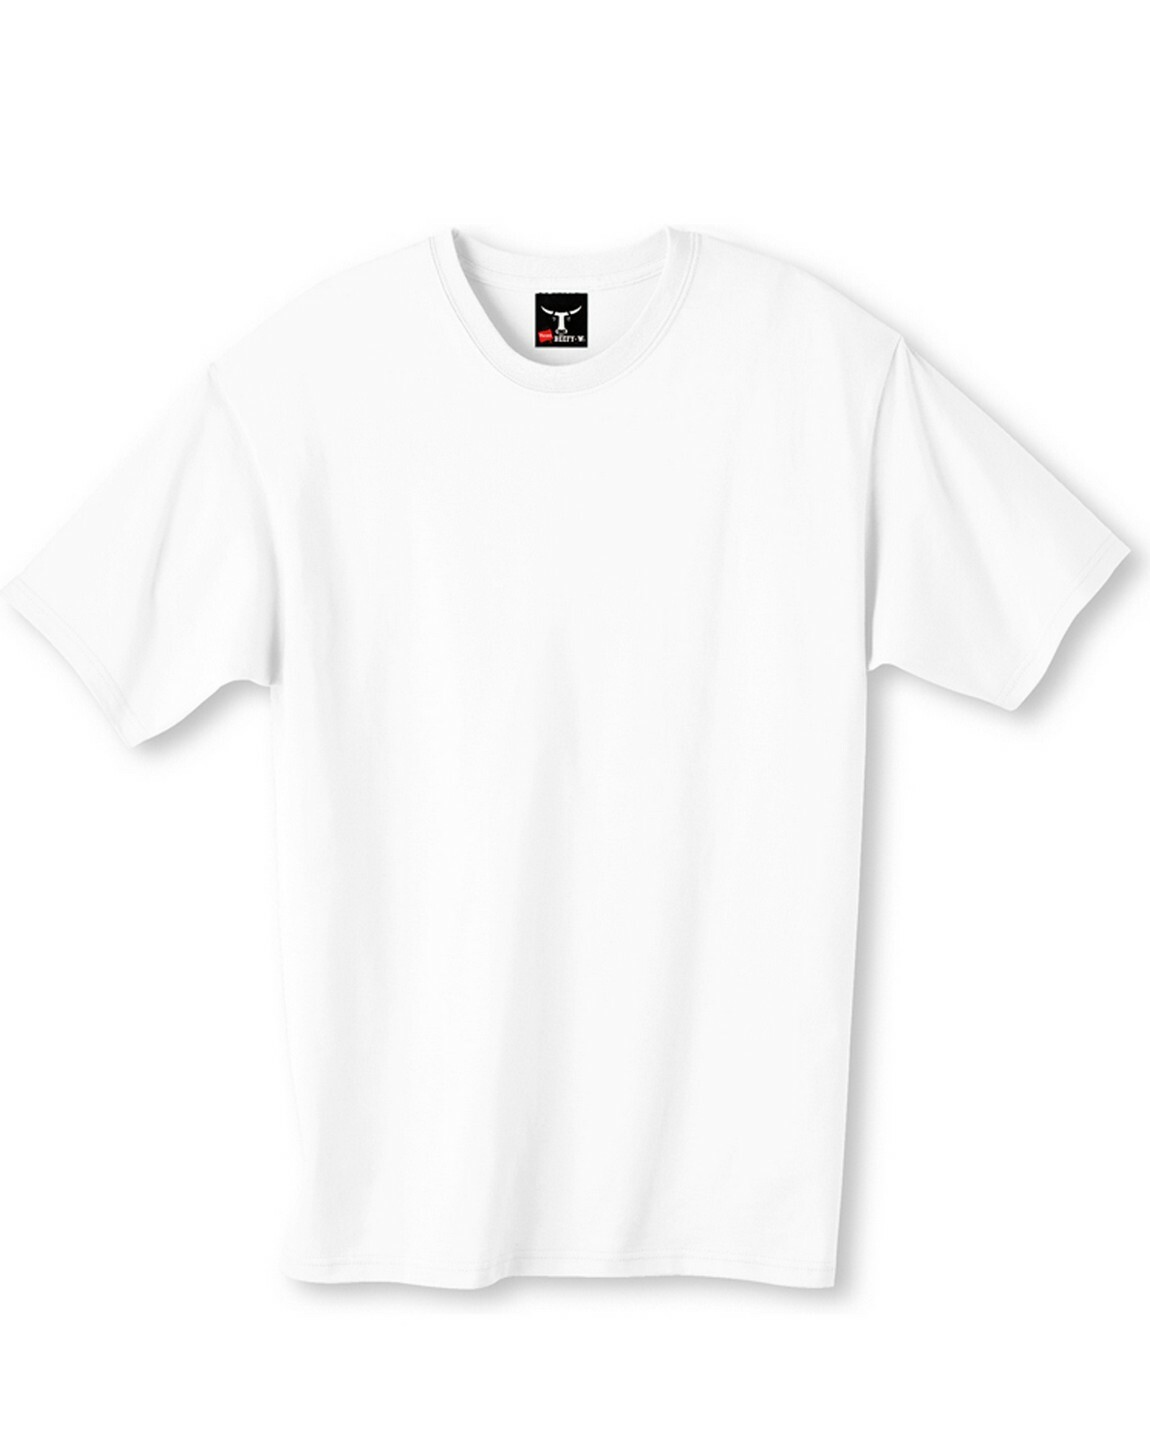 Hanes 5180 Beefy T Adult Short-Sleeve T-Shirt Size 5XL, White